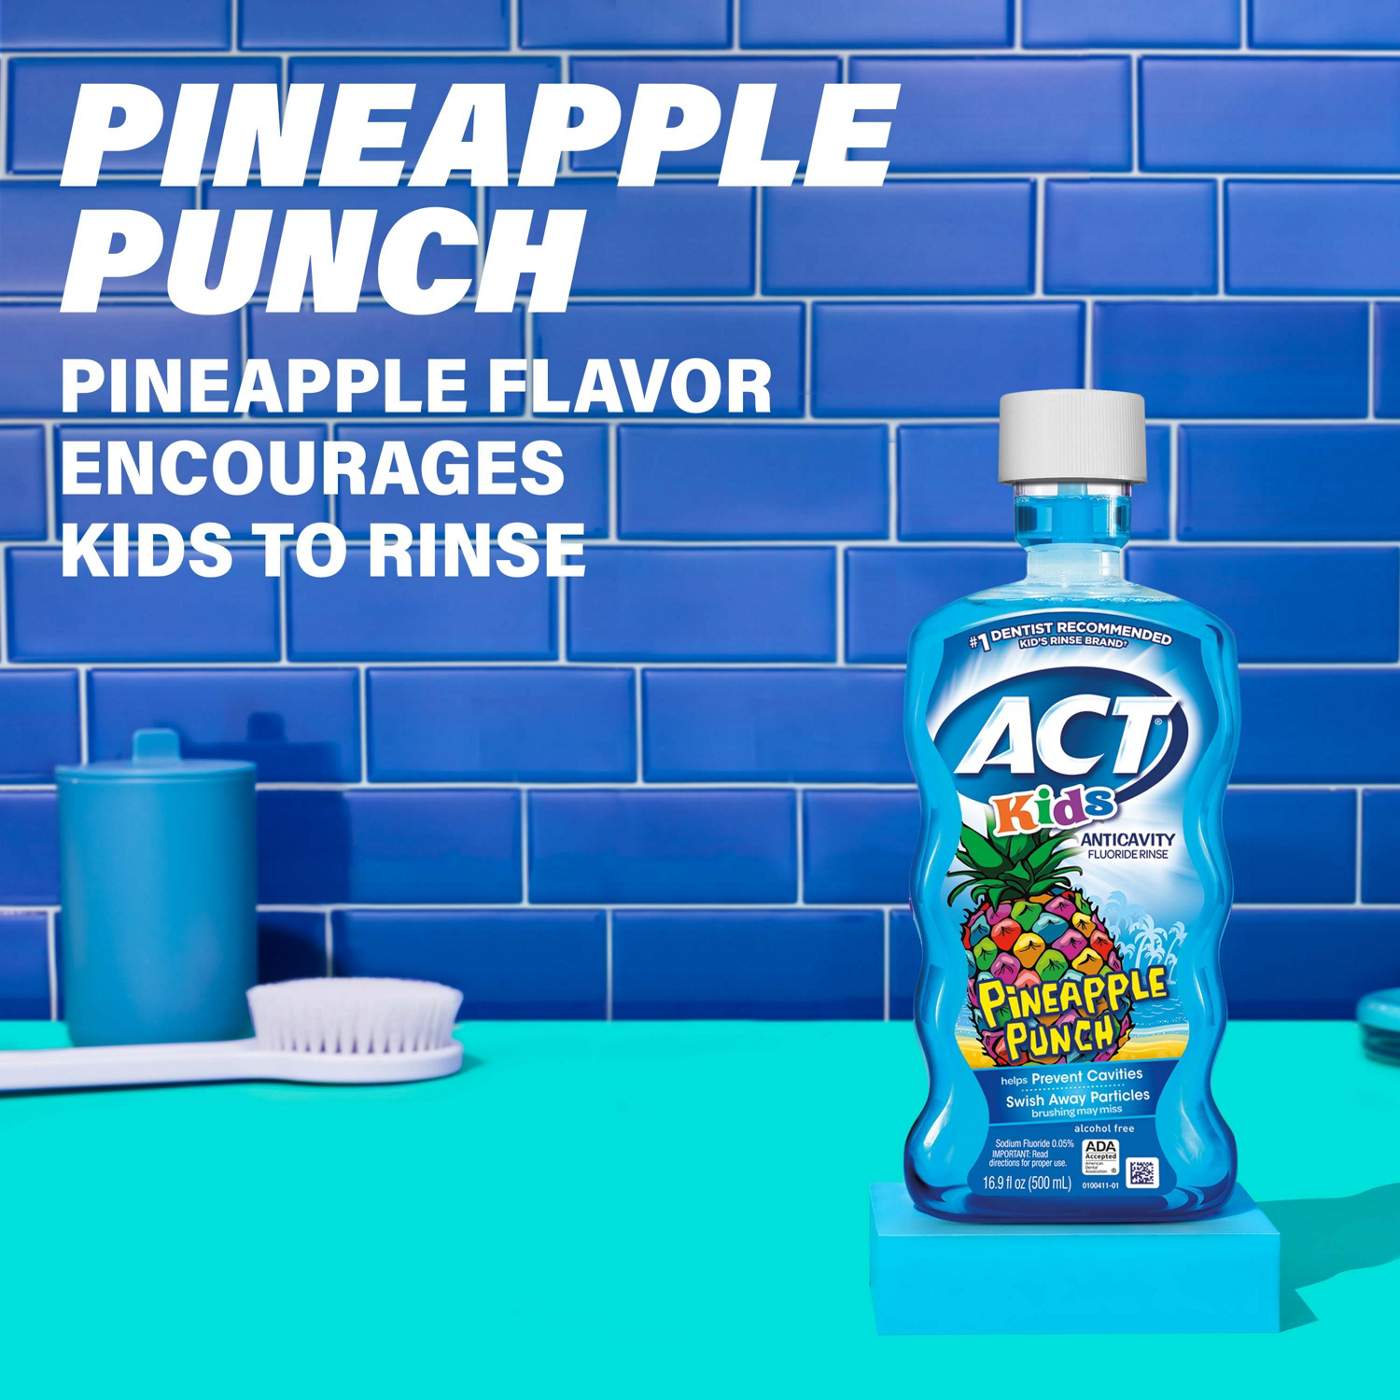 ACT Kids Anticavity Fluoride Rinse - Pineapple Punch; image 2 of 6